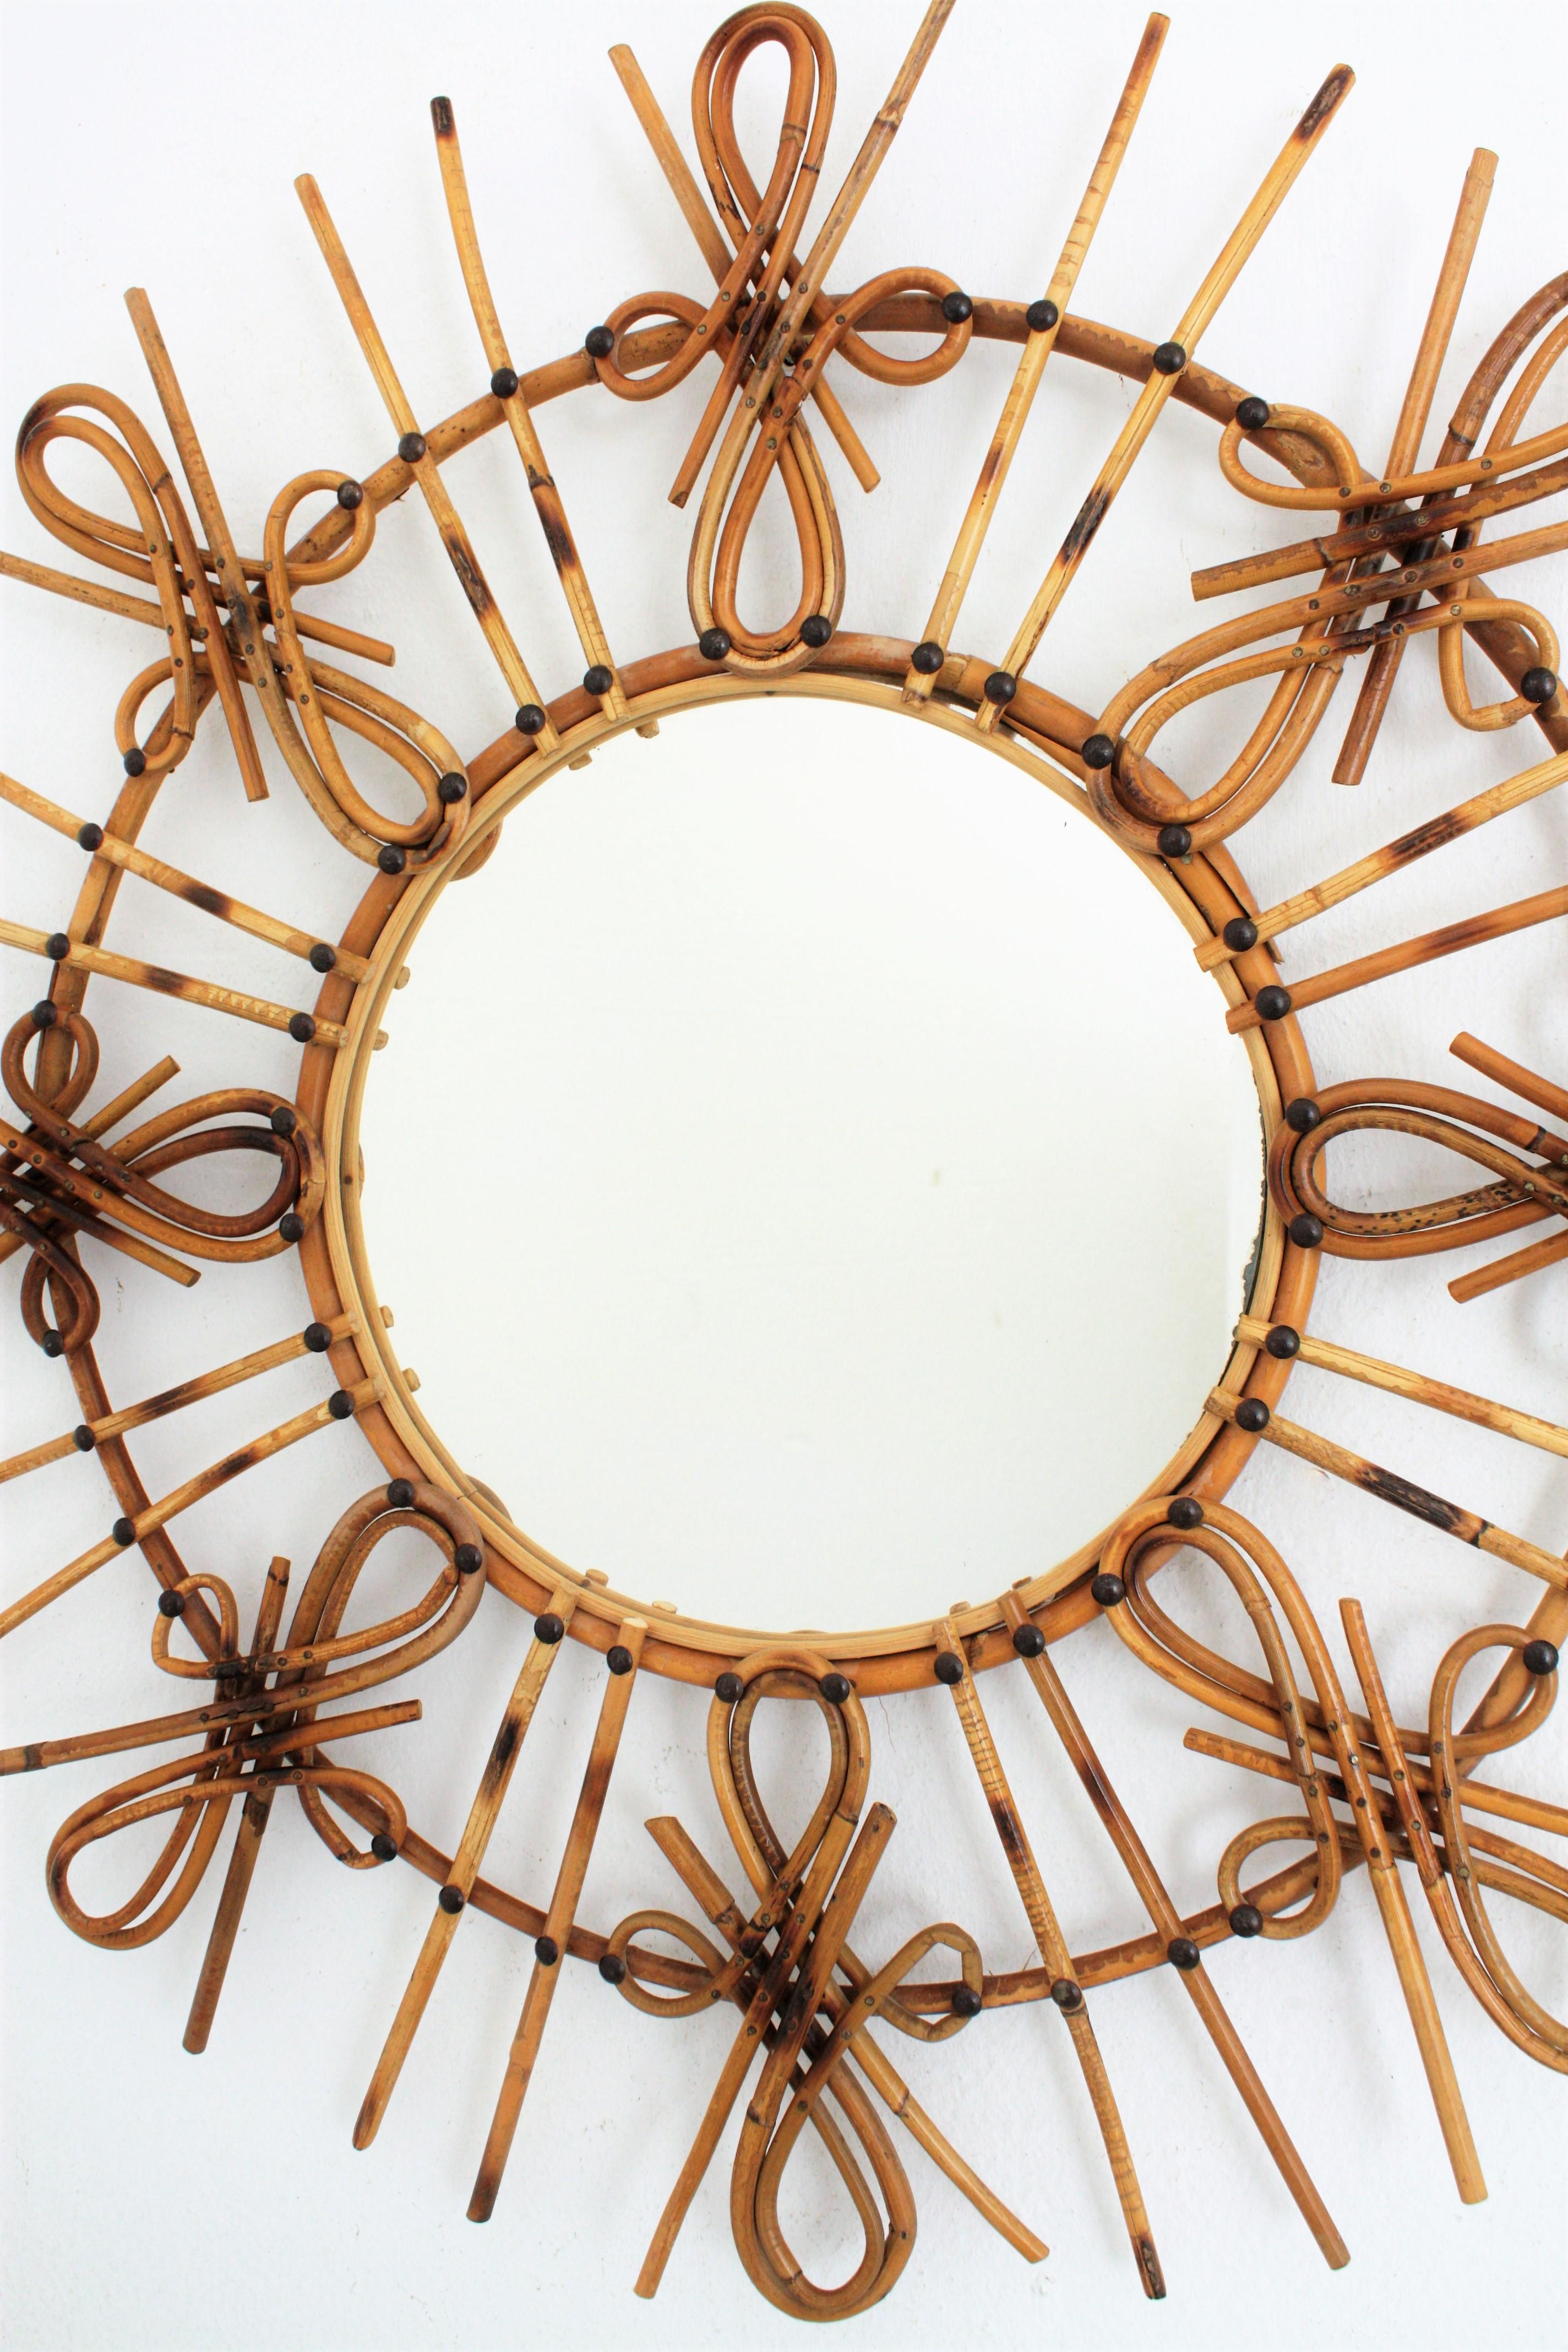 Wicker Rattan Sunburst Mirror with Chinoiserie Motif, 1950s For Sale